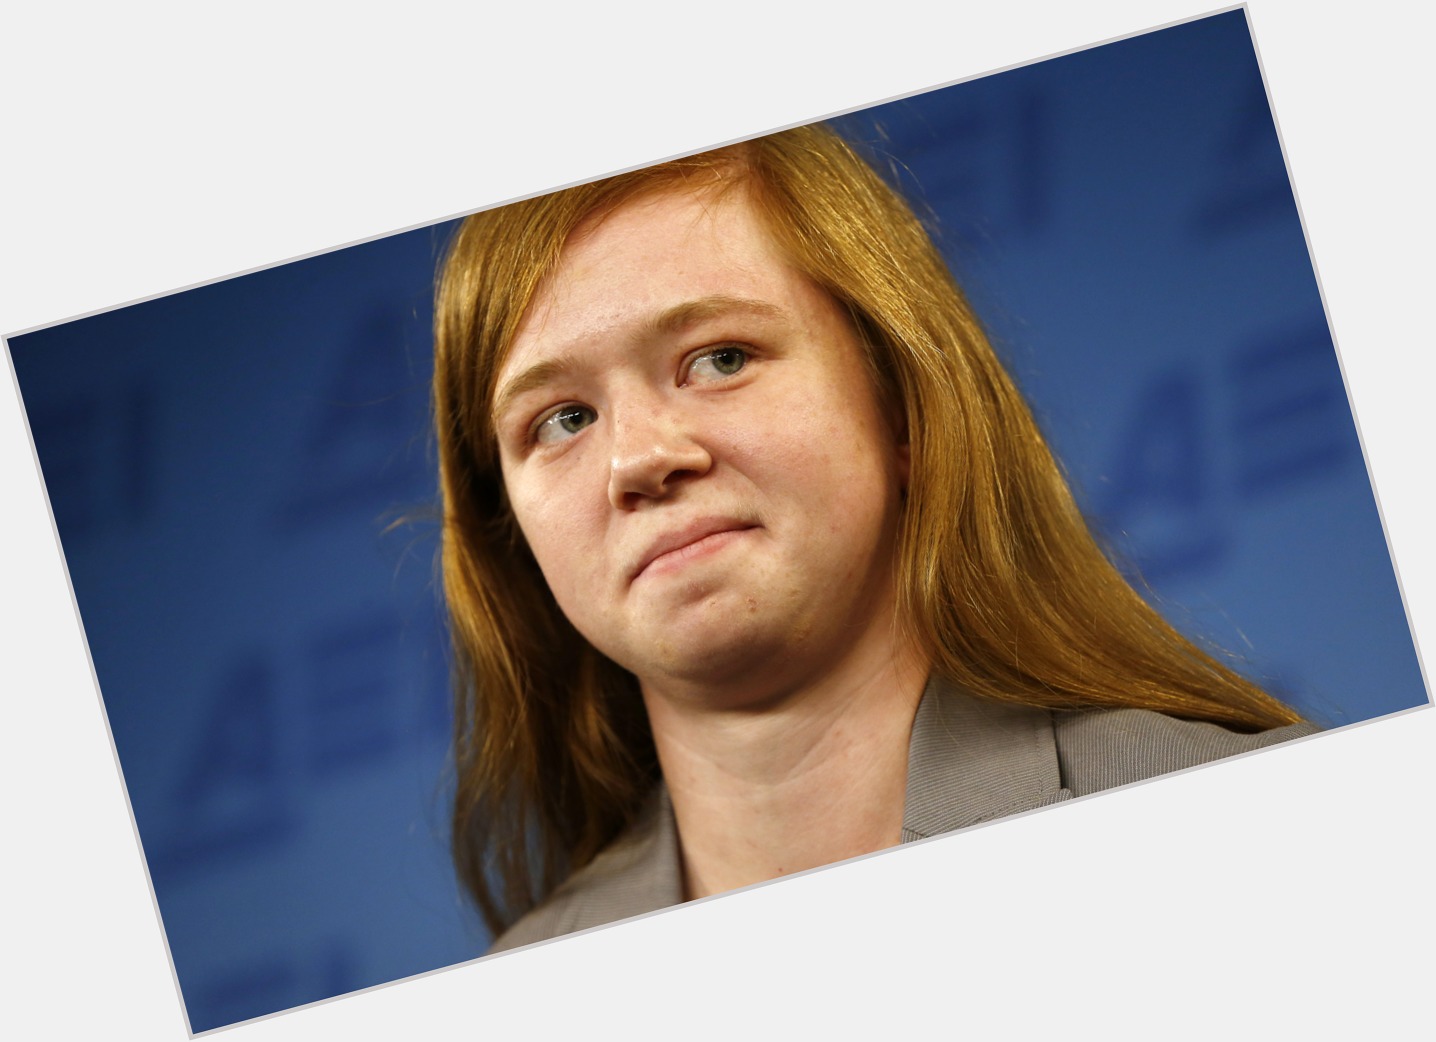 <a href="/hot-women/abigail-fisher/where-dating-news-photos">Abigail Fisher</a>  